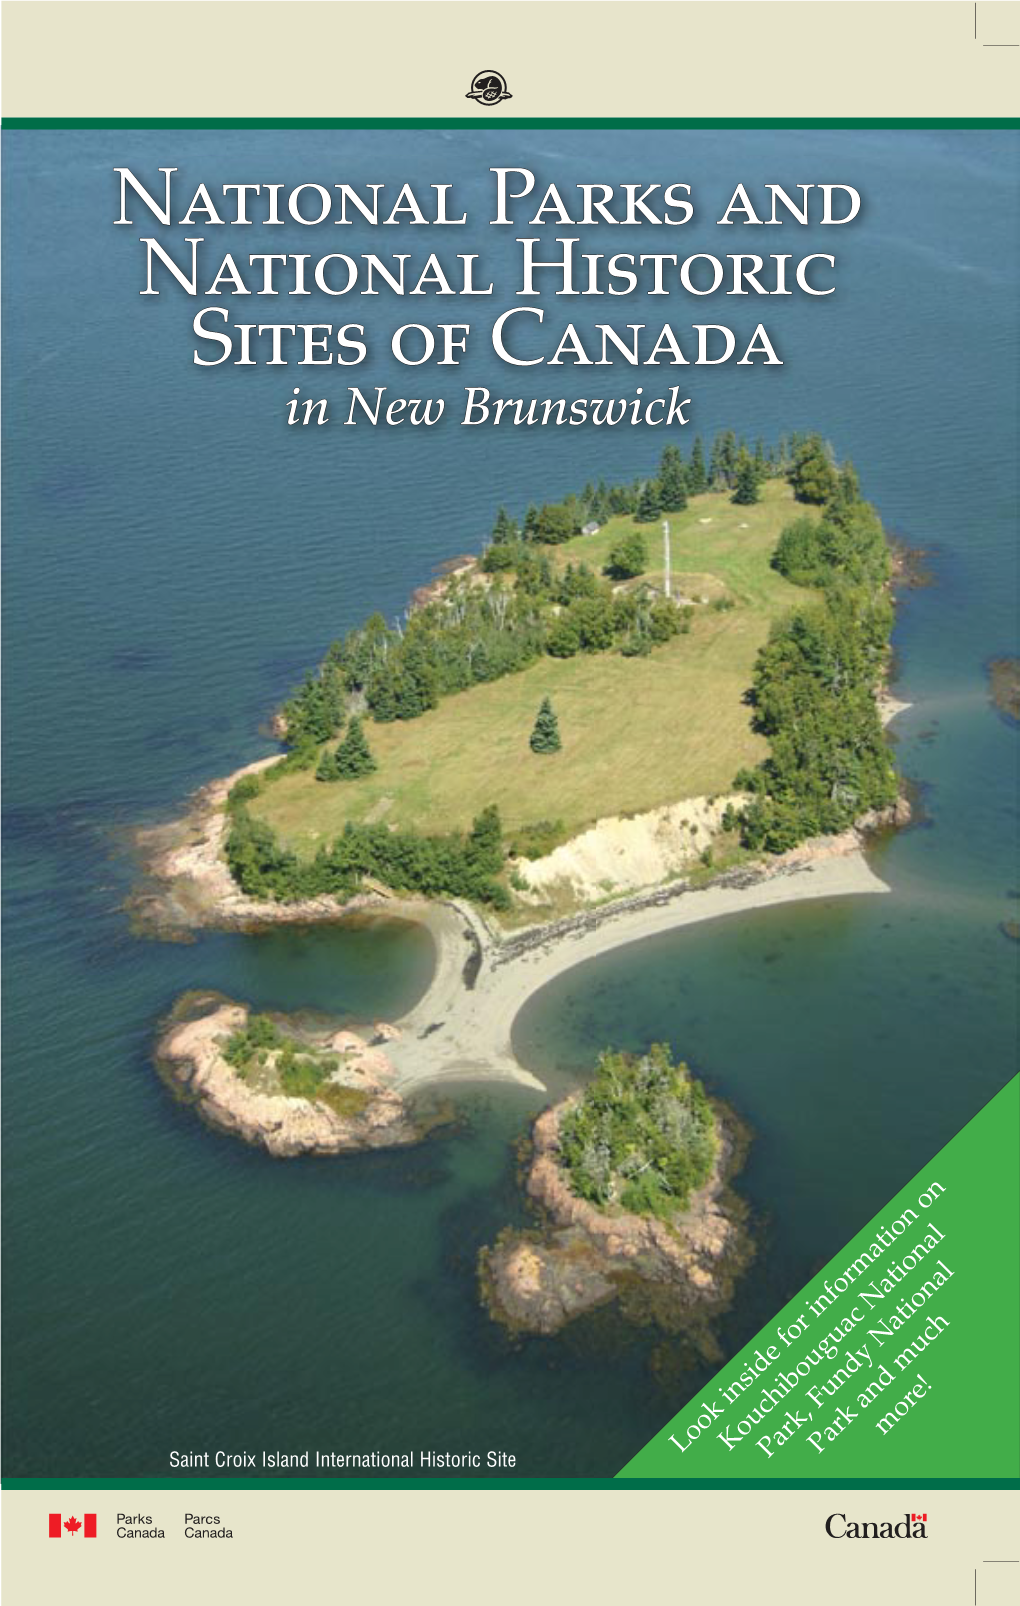 National Parks and National Historic Sites of Canada in New Brunswick